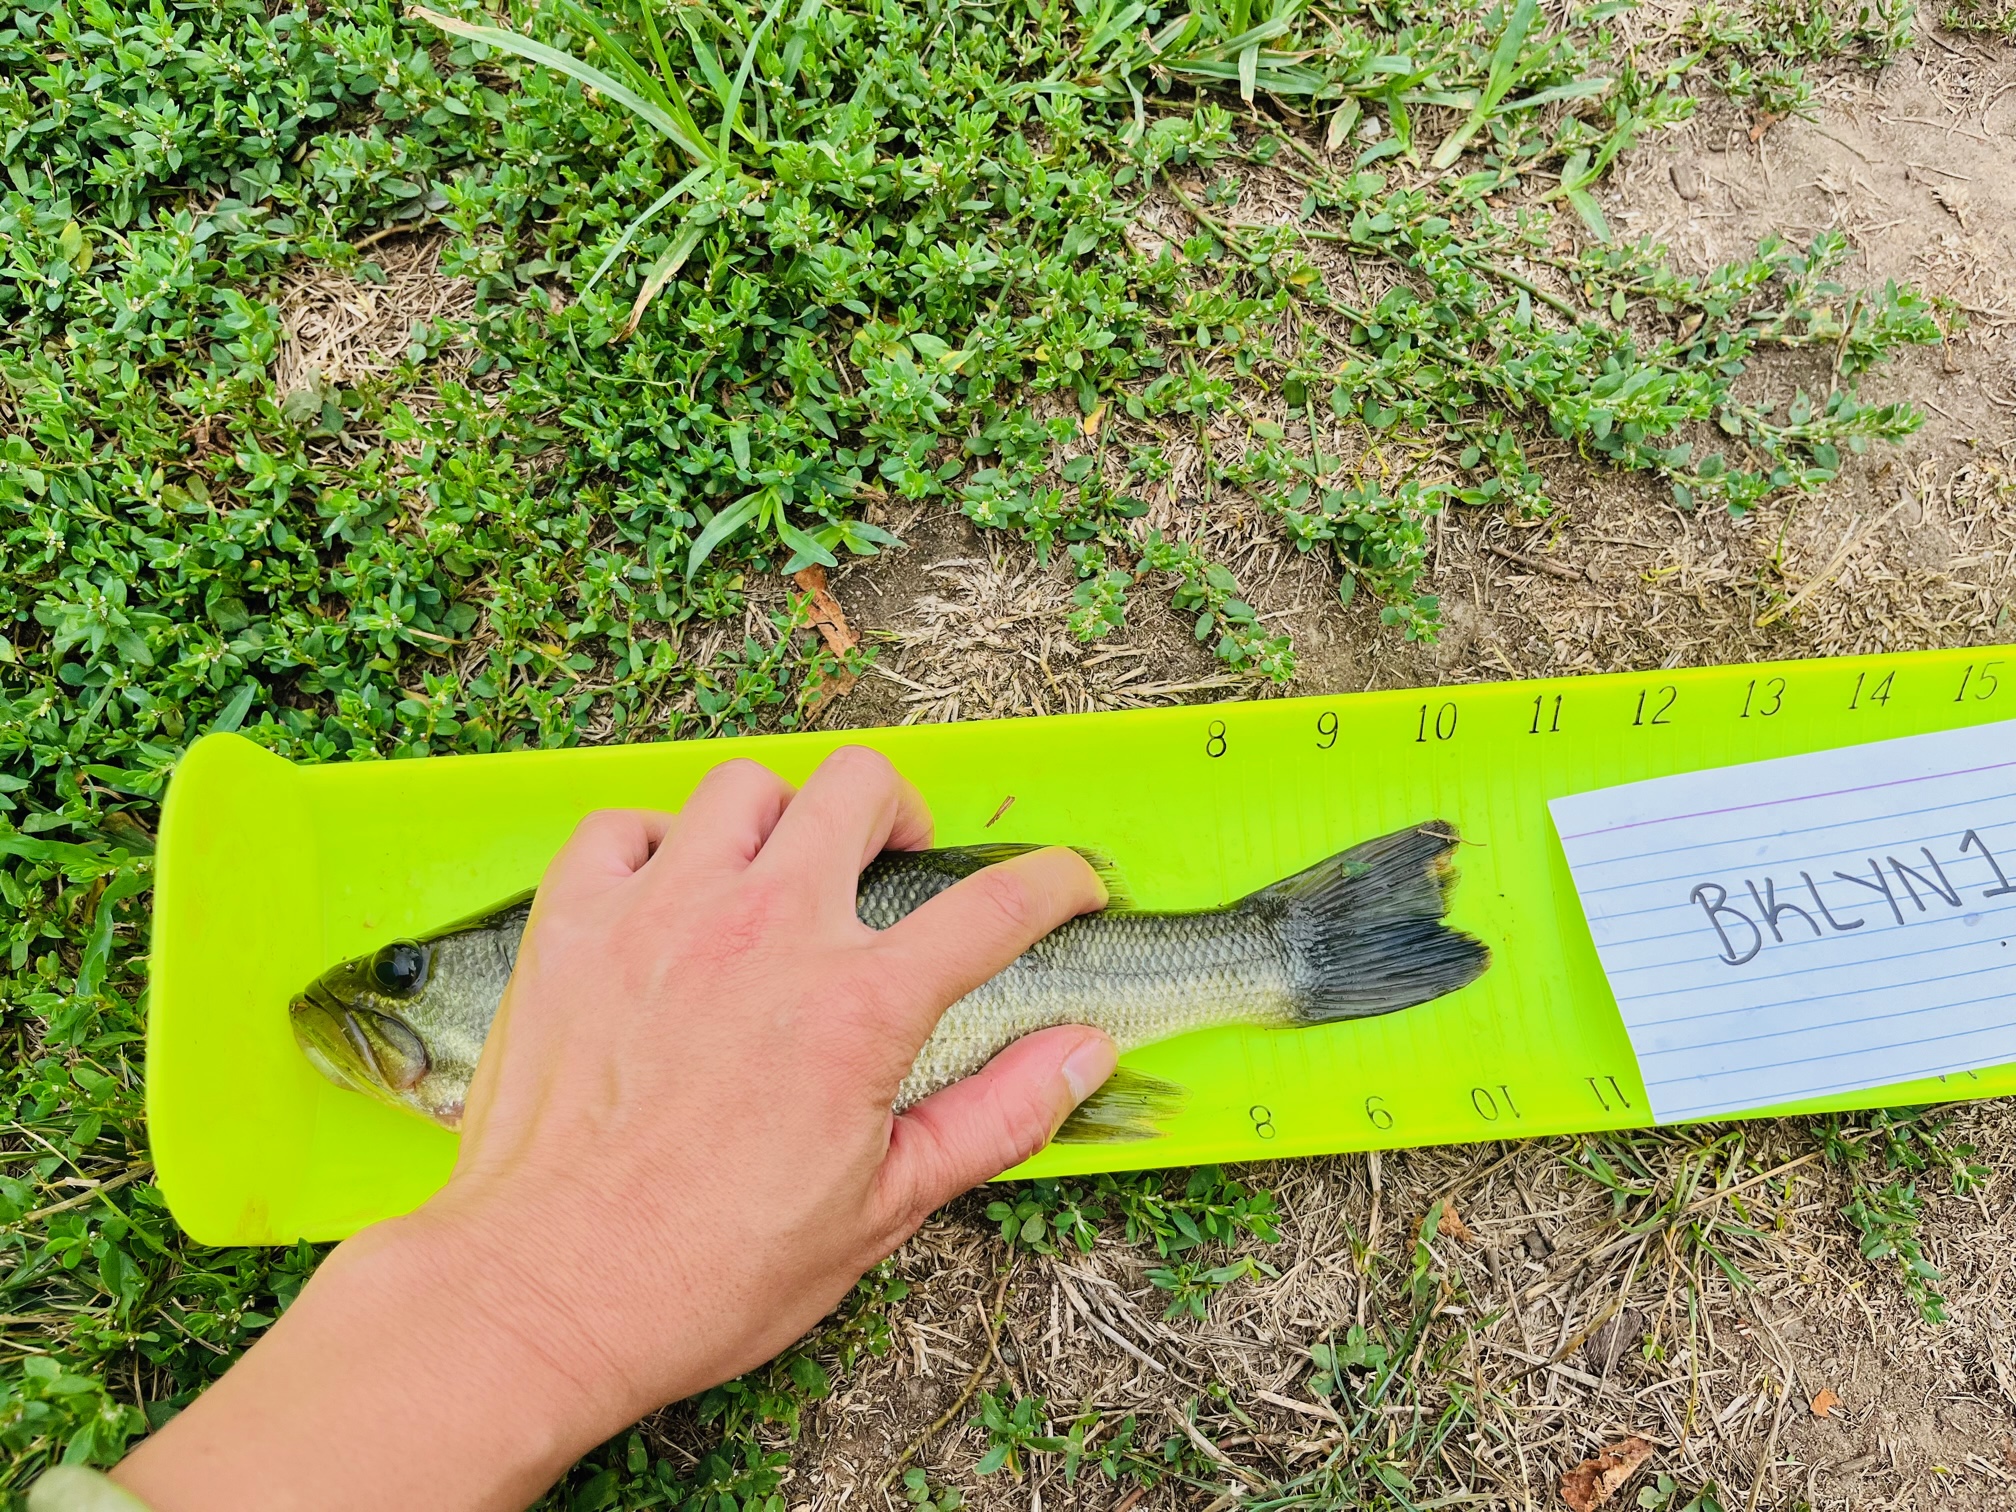 A largemouth bass is being measured on a neon-yellow Hawg Trough.